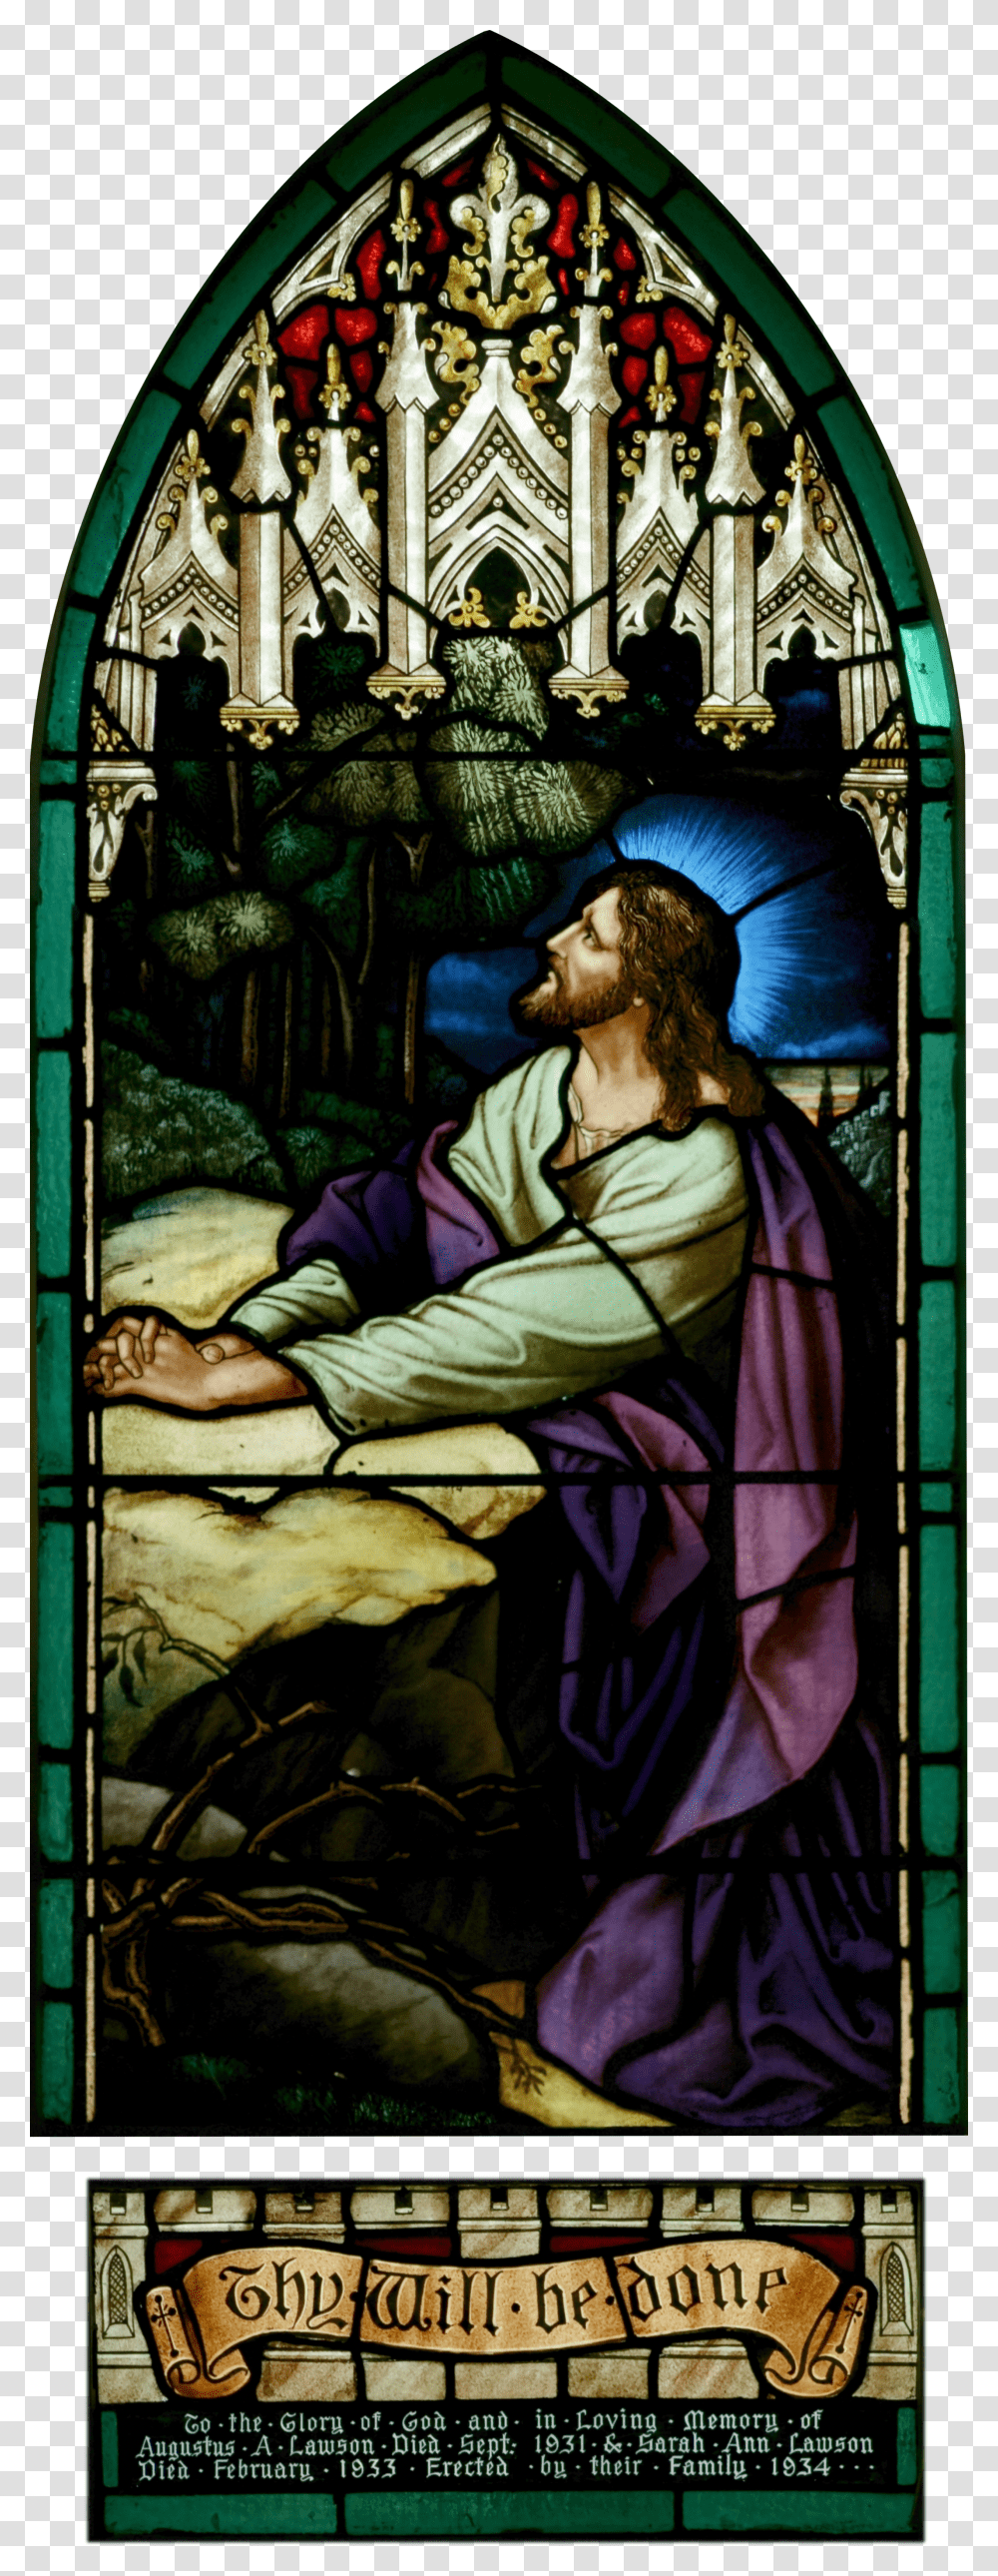 Stjohnsashfield Stainedglass Gethsemane Stained Glass Window Transparent Png